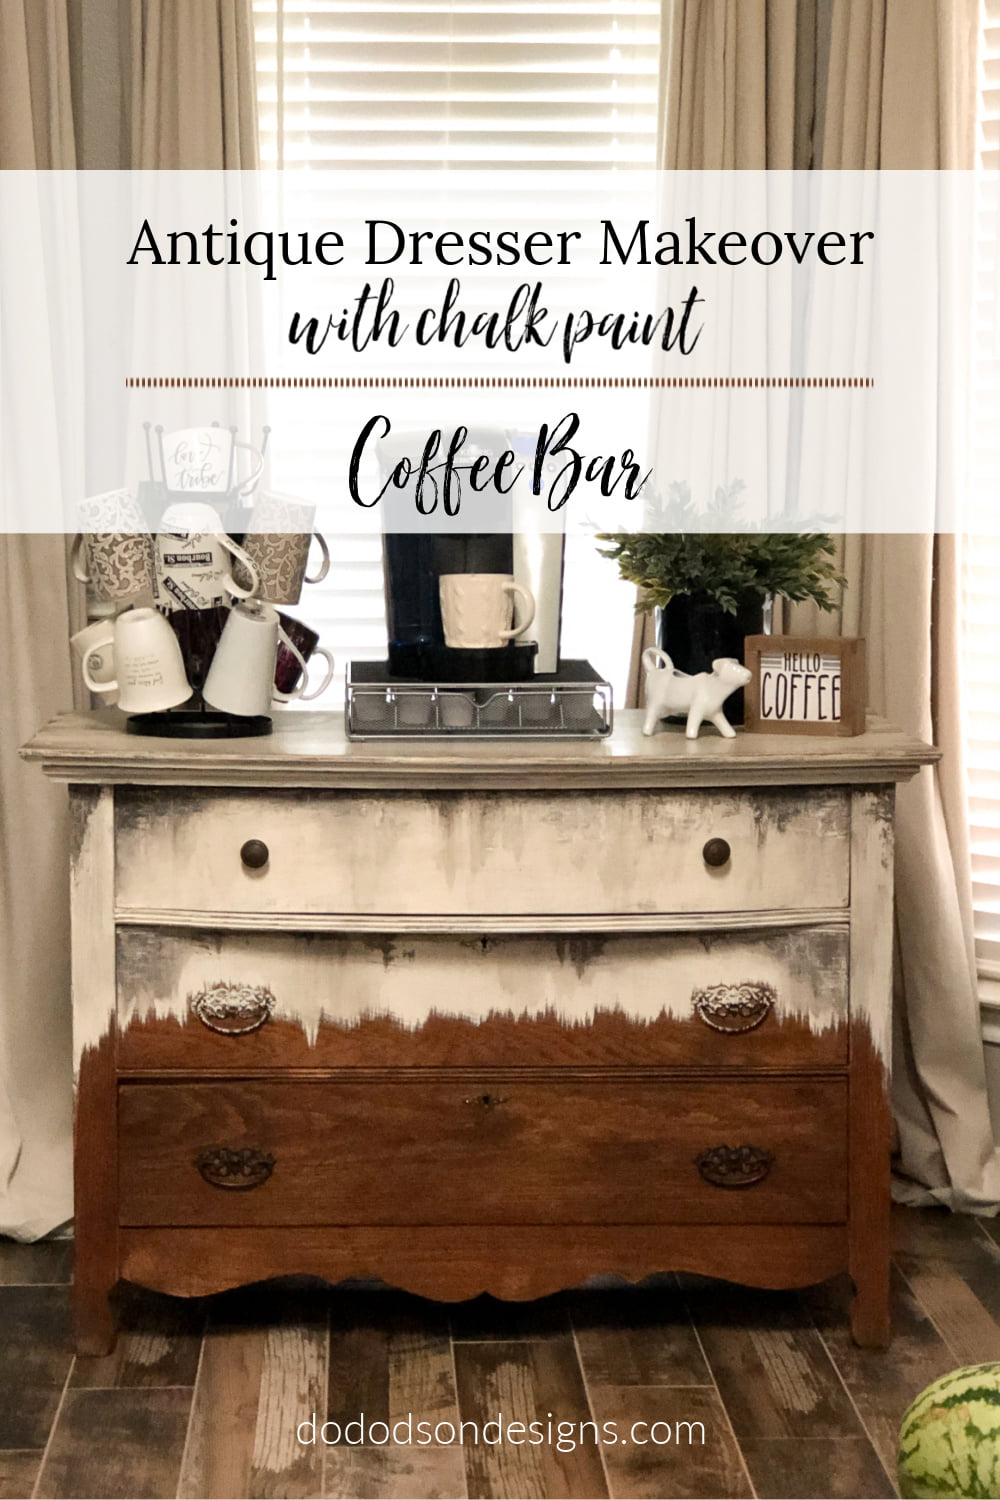 How To Update An Antique Dresser With Chalk Paint